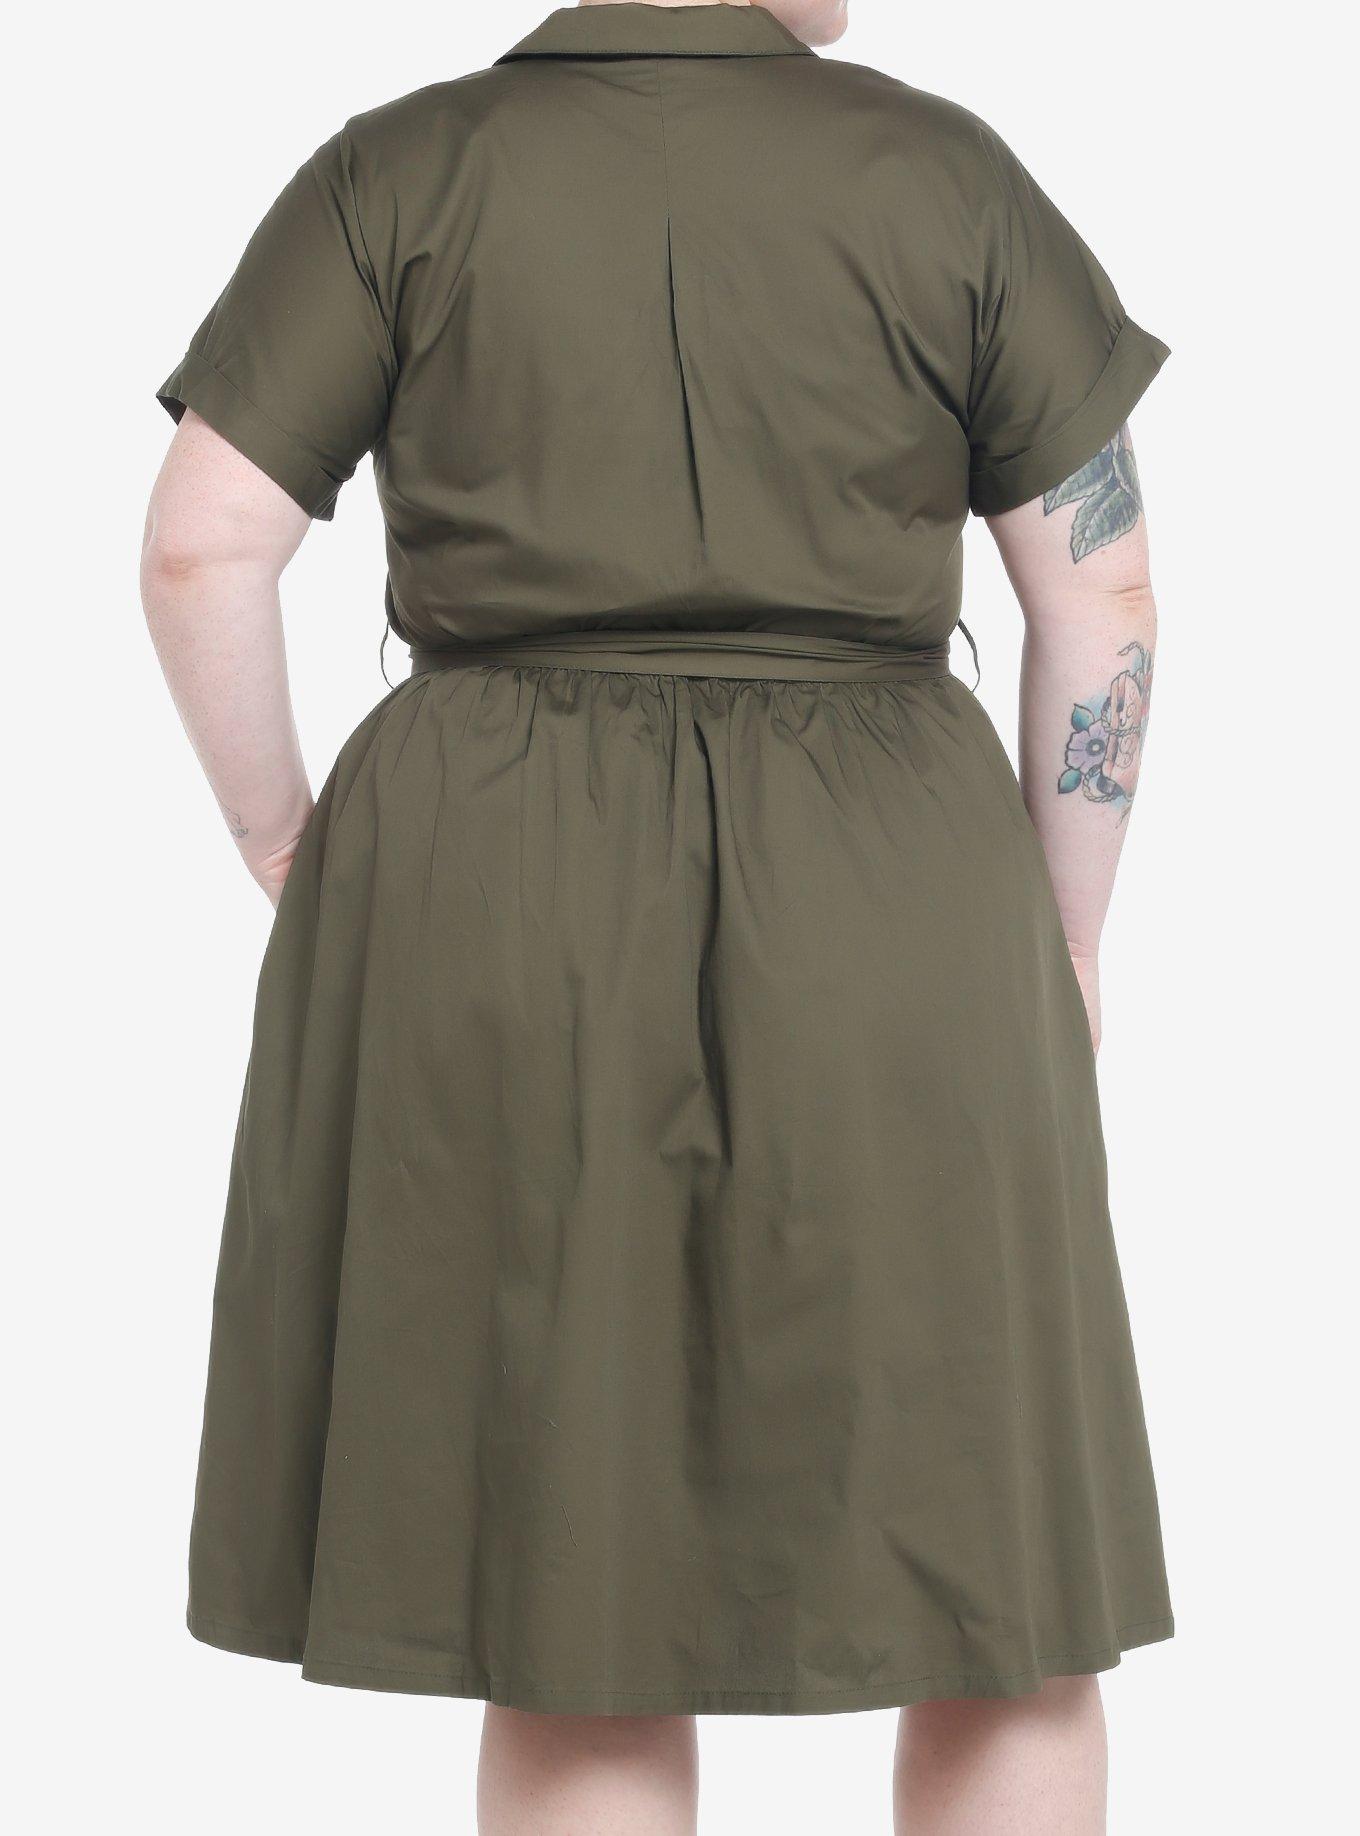 Her Universe Star Wars Leia Endor Cargo Dress Plus Size Her Universe Exclusive, GREEN  OLIVE, alternate